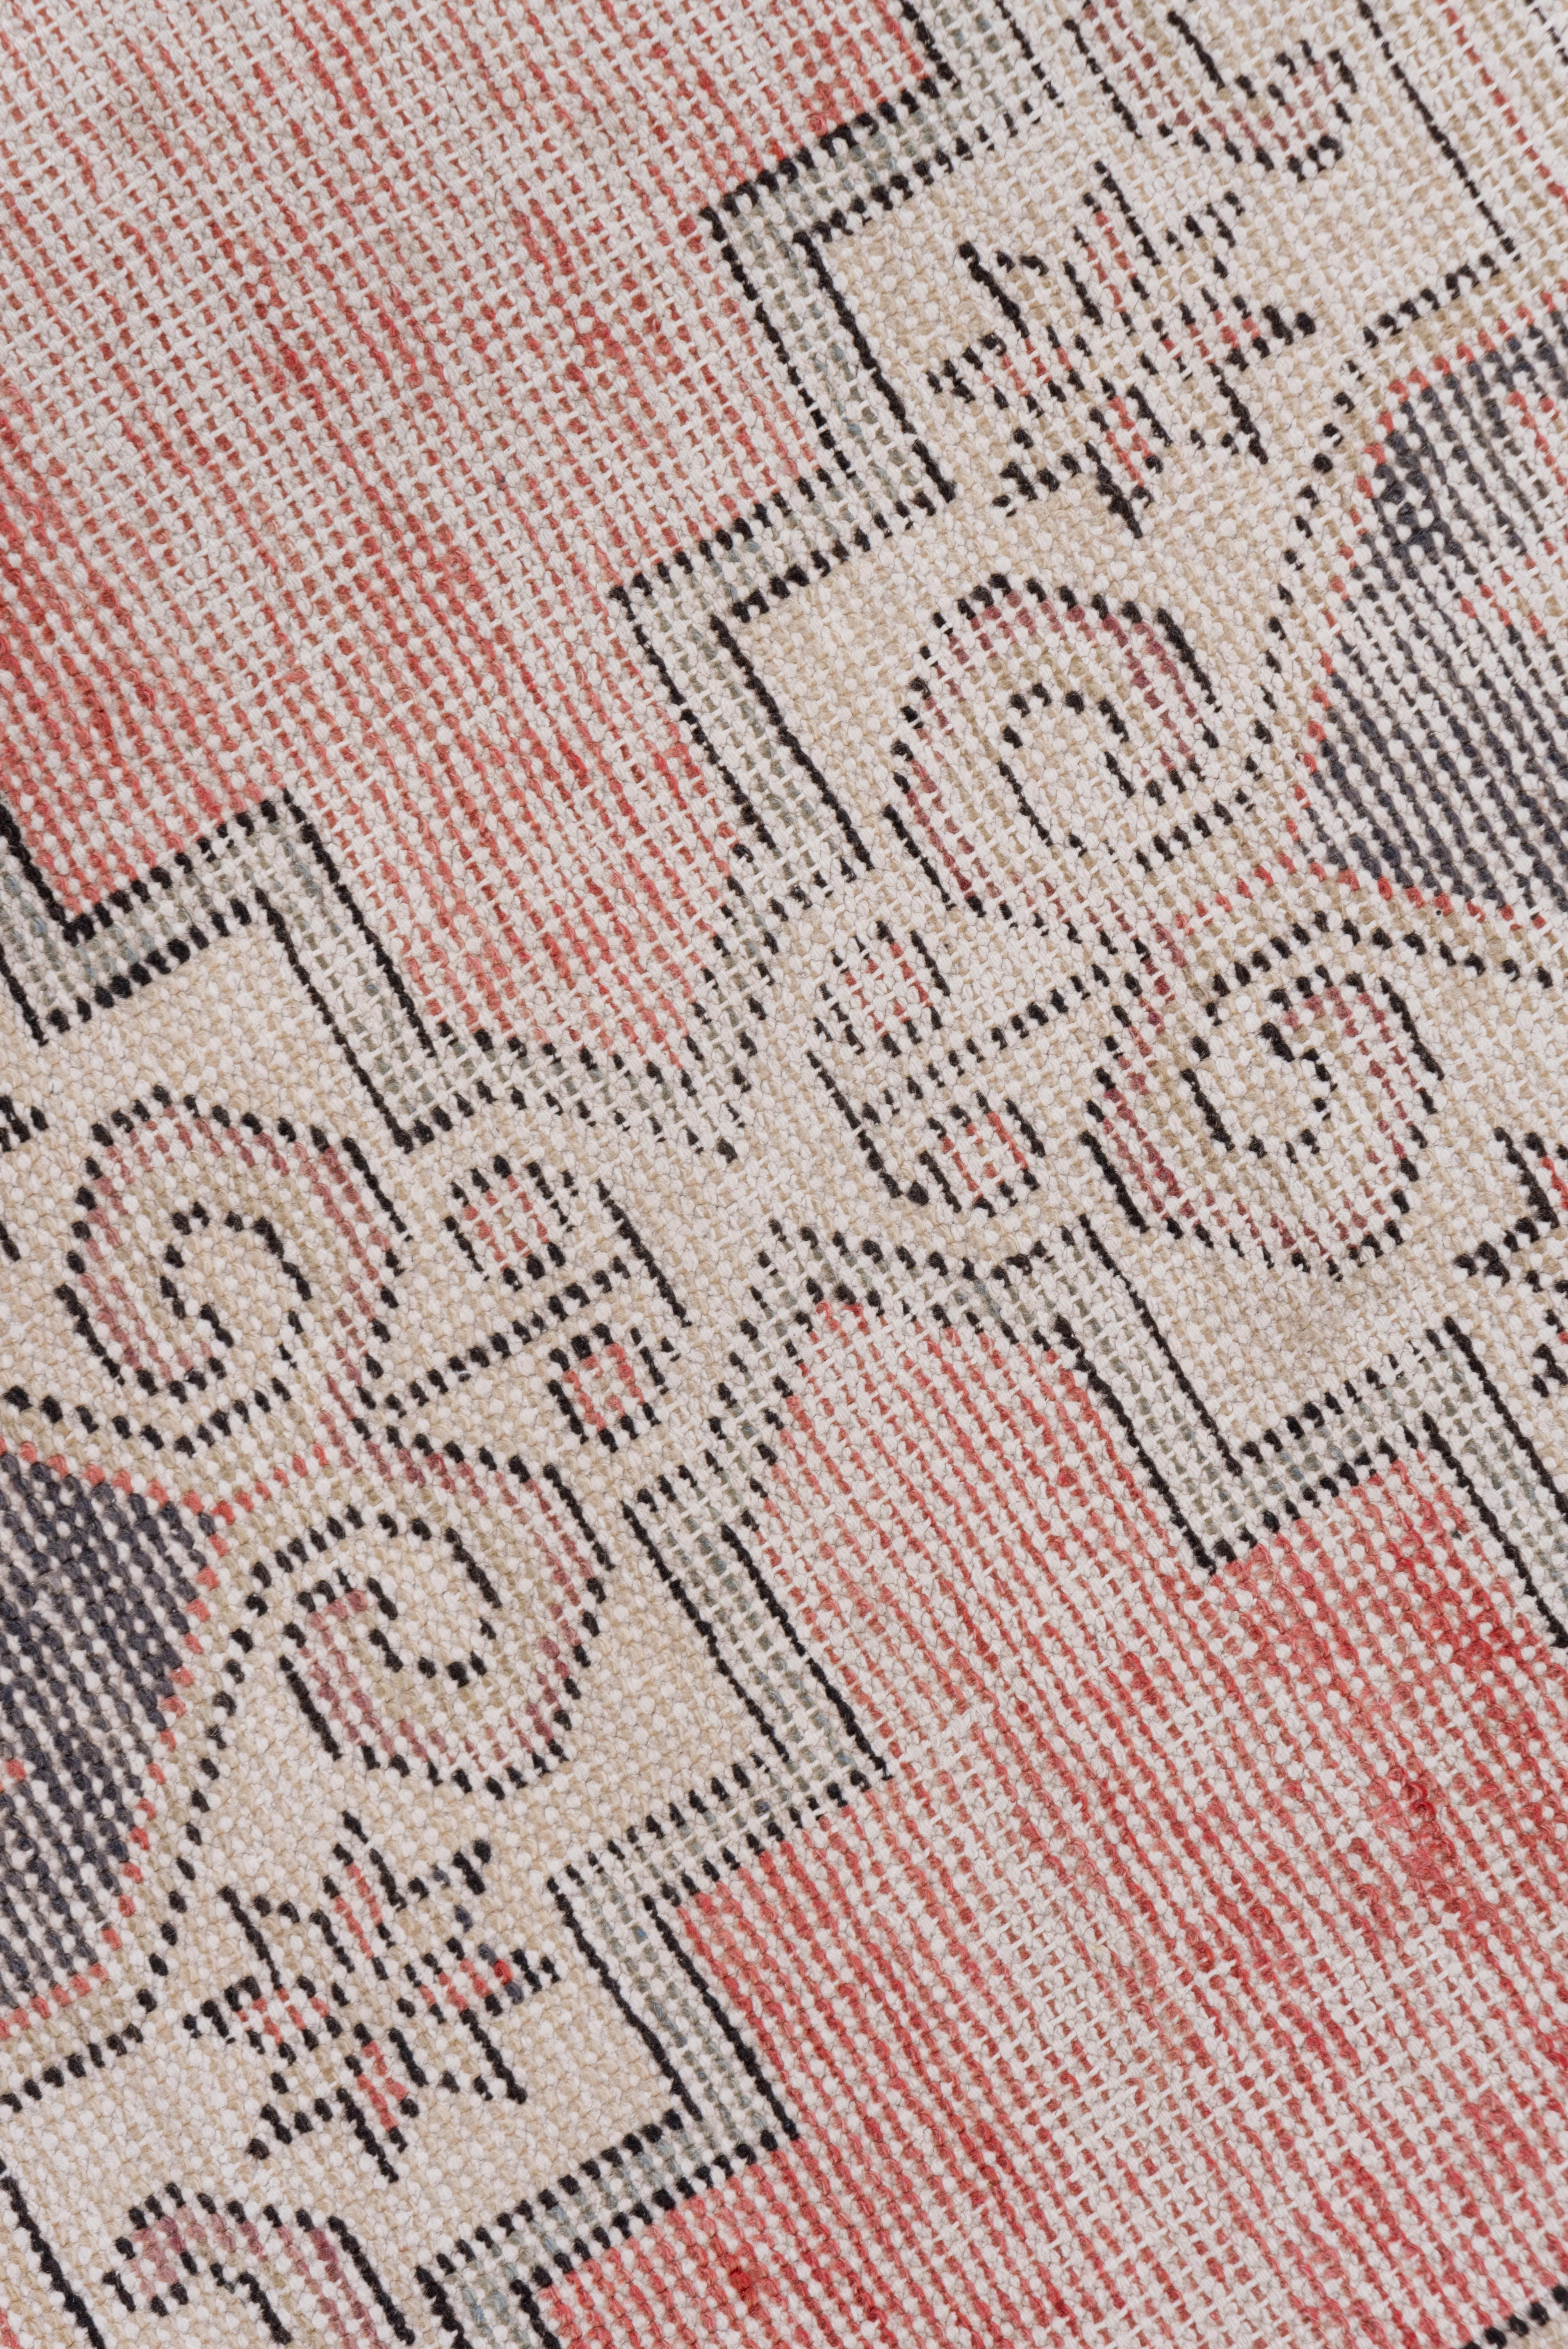 Hand-Knotted Distressed Red Oushak Runner